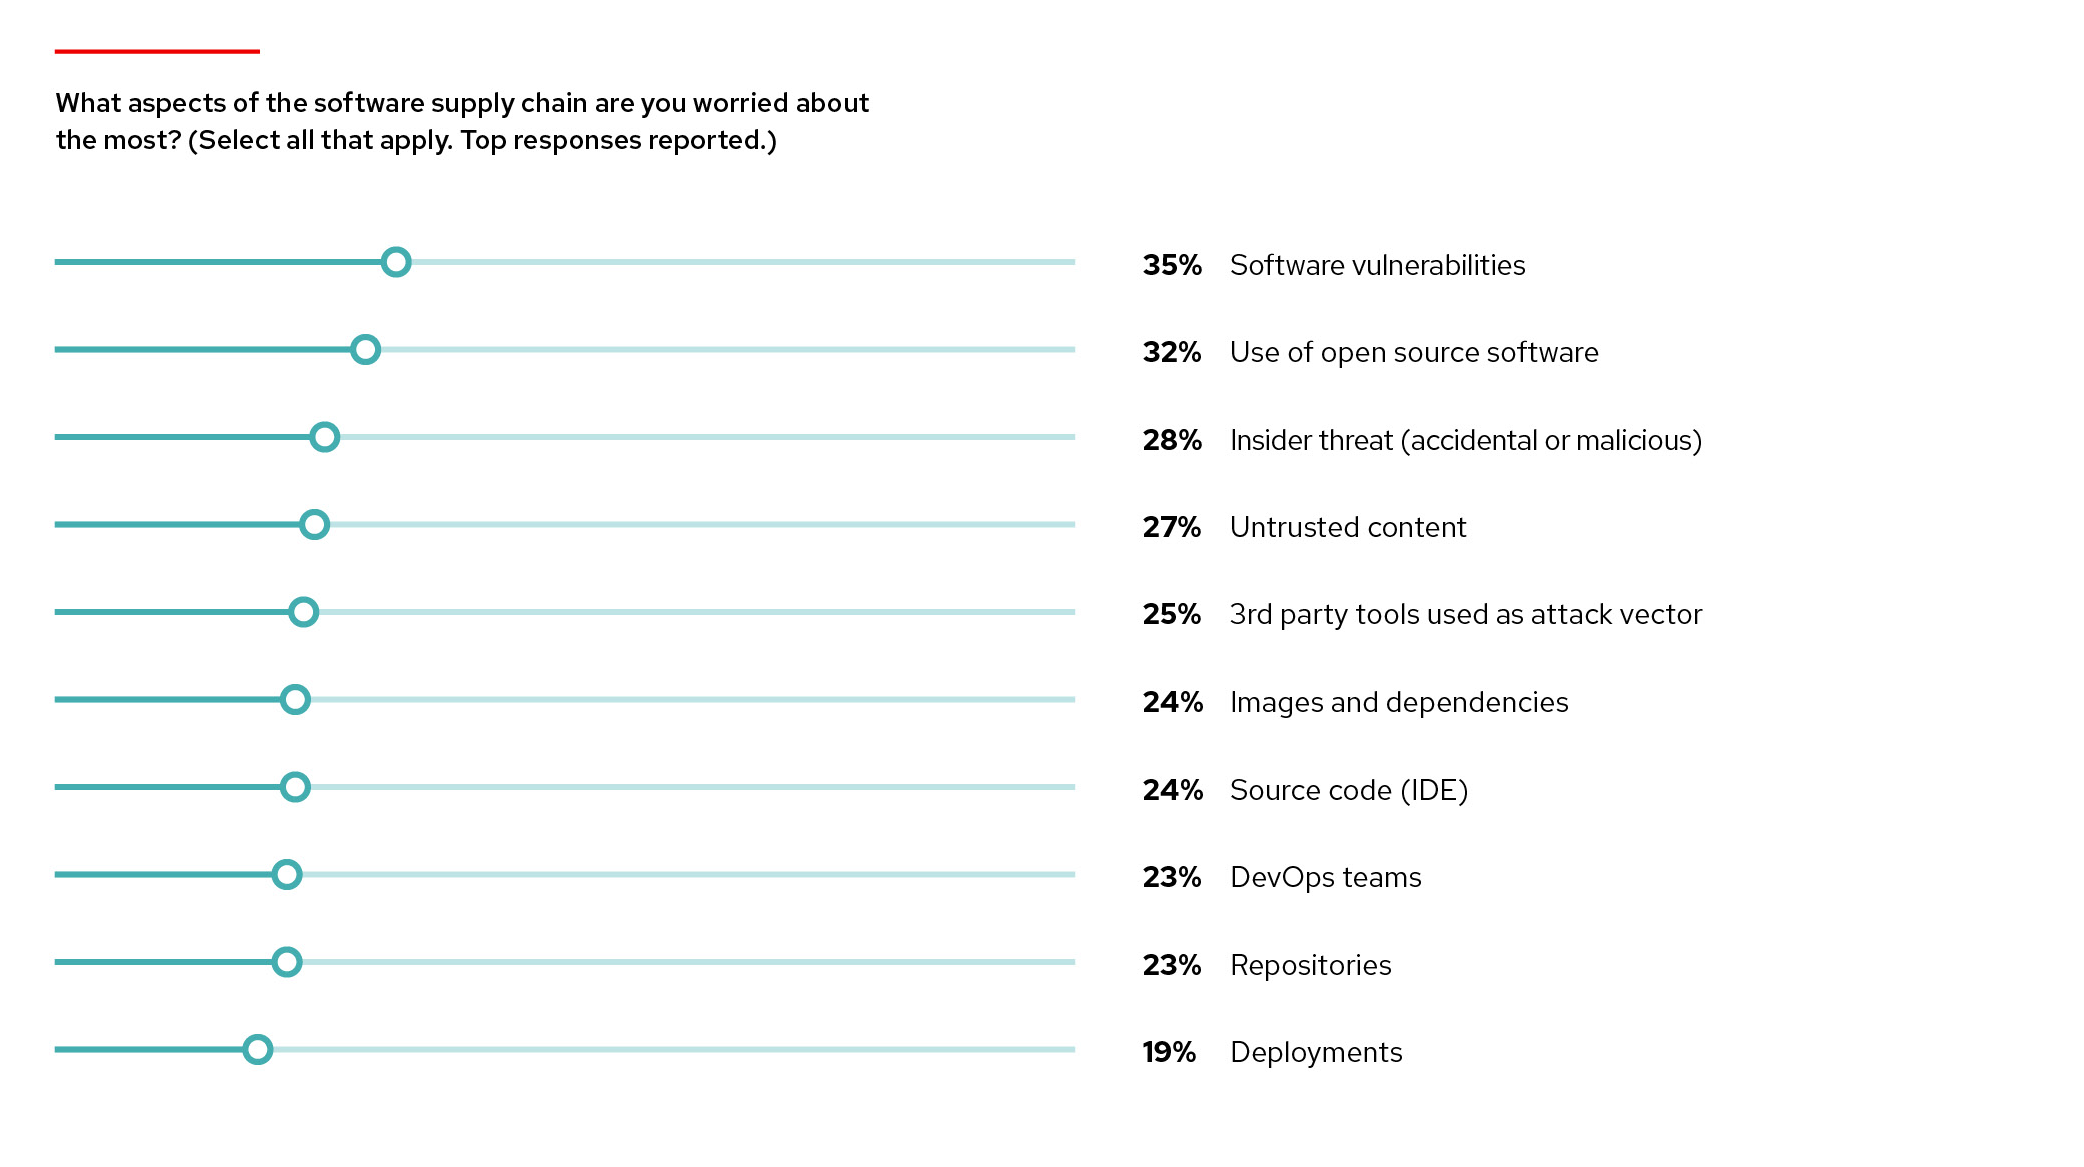 Chart: What aspects of the software supply chain are you worried about most? Select all that apply. Top answers are Software vulnerabilities at 35%, Use of open source software at 32%, Insider threat (accidental or malicious) at 28%, and Untrusted content at 27%.